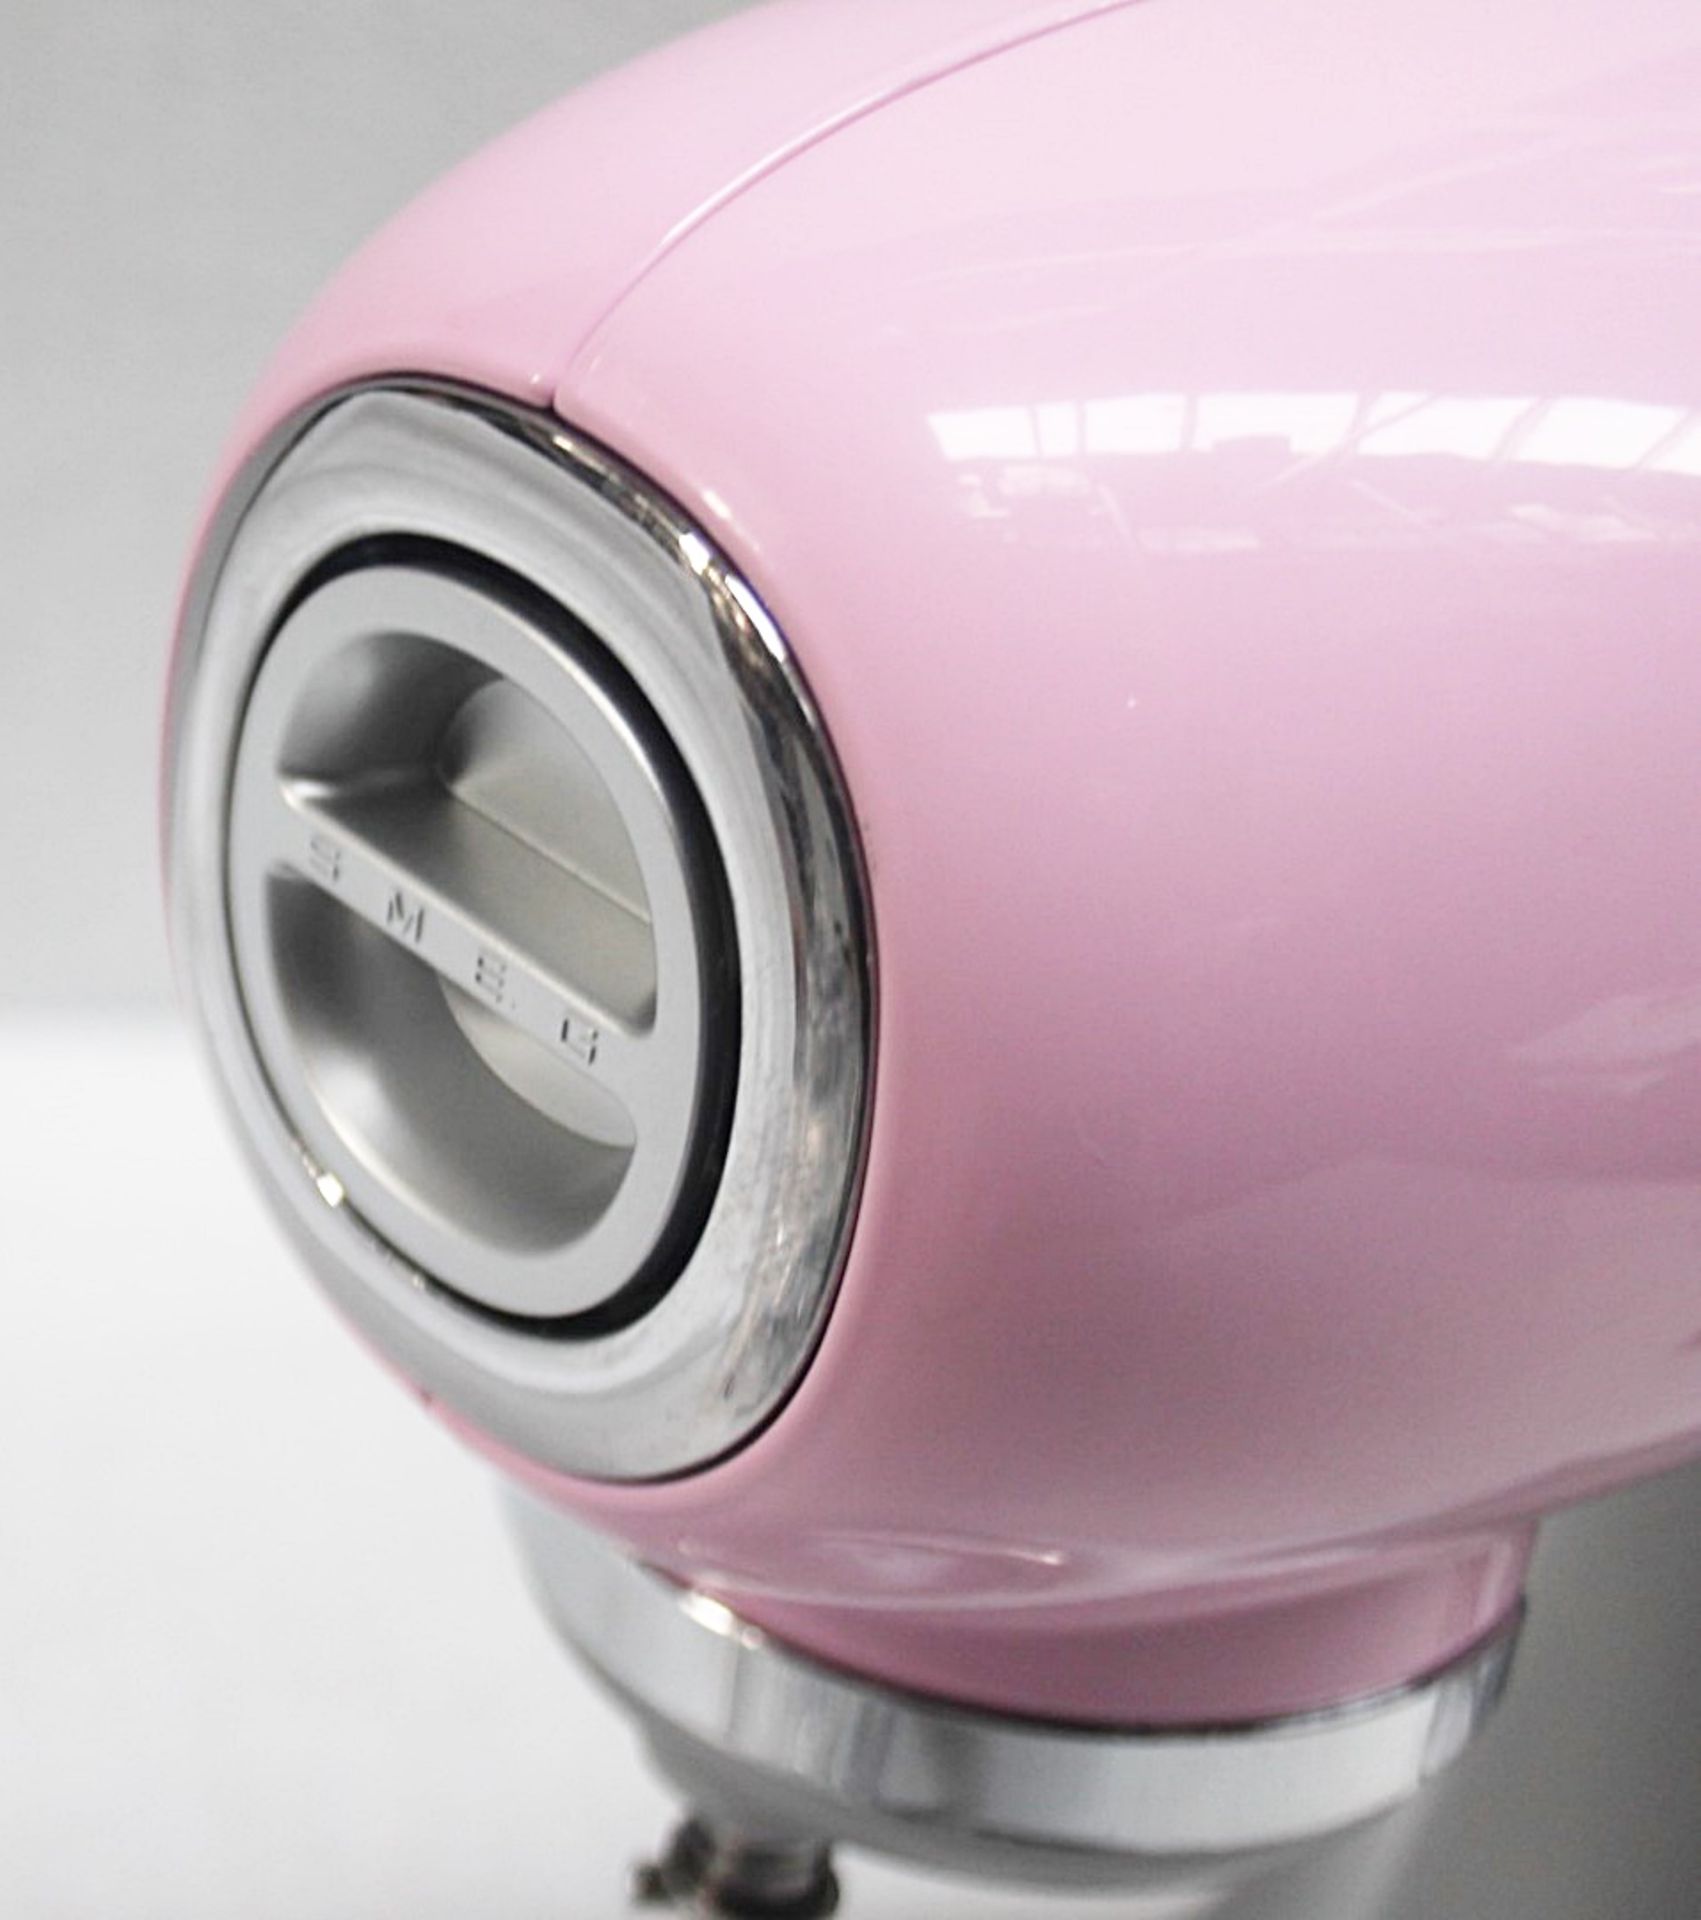 1 x SMEG 50's Retro Stand Mixer In Pink With 4.8 Litre Bowl And Accessories - RRP £499.00 - Image 9 of 14